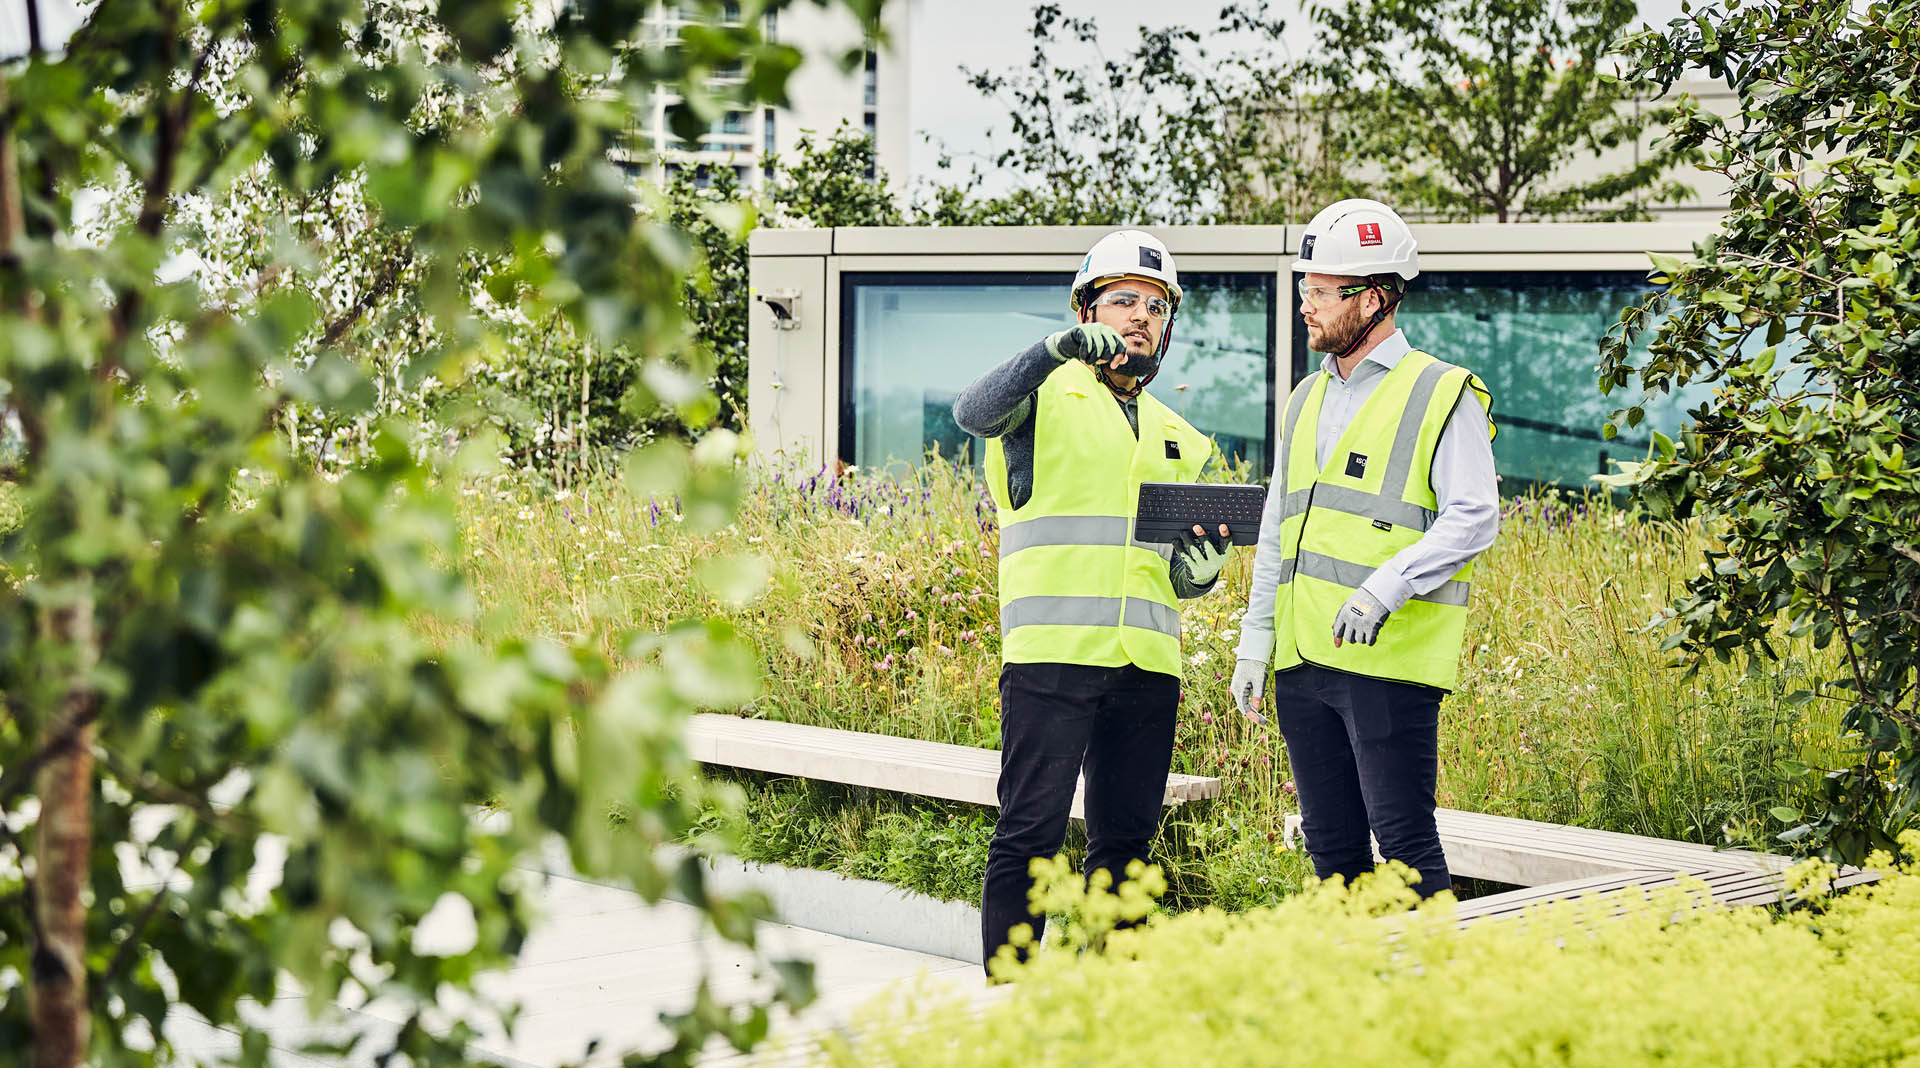 Two men in hi-viz vests and hard hats surrounded by green plants